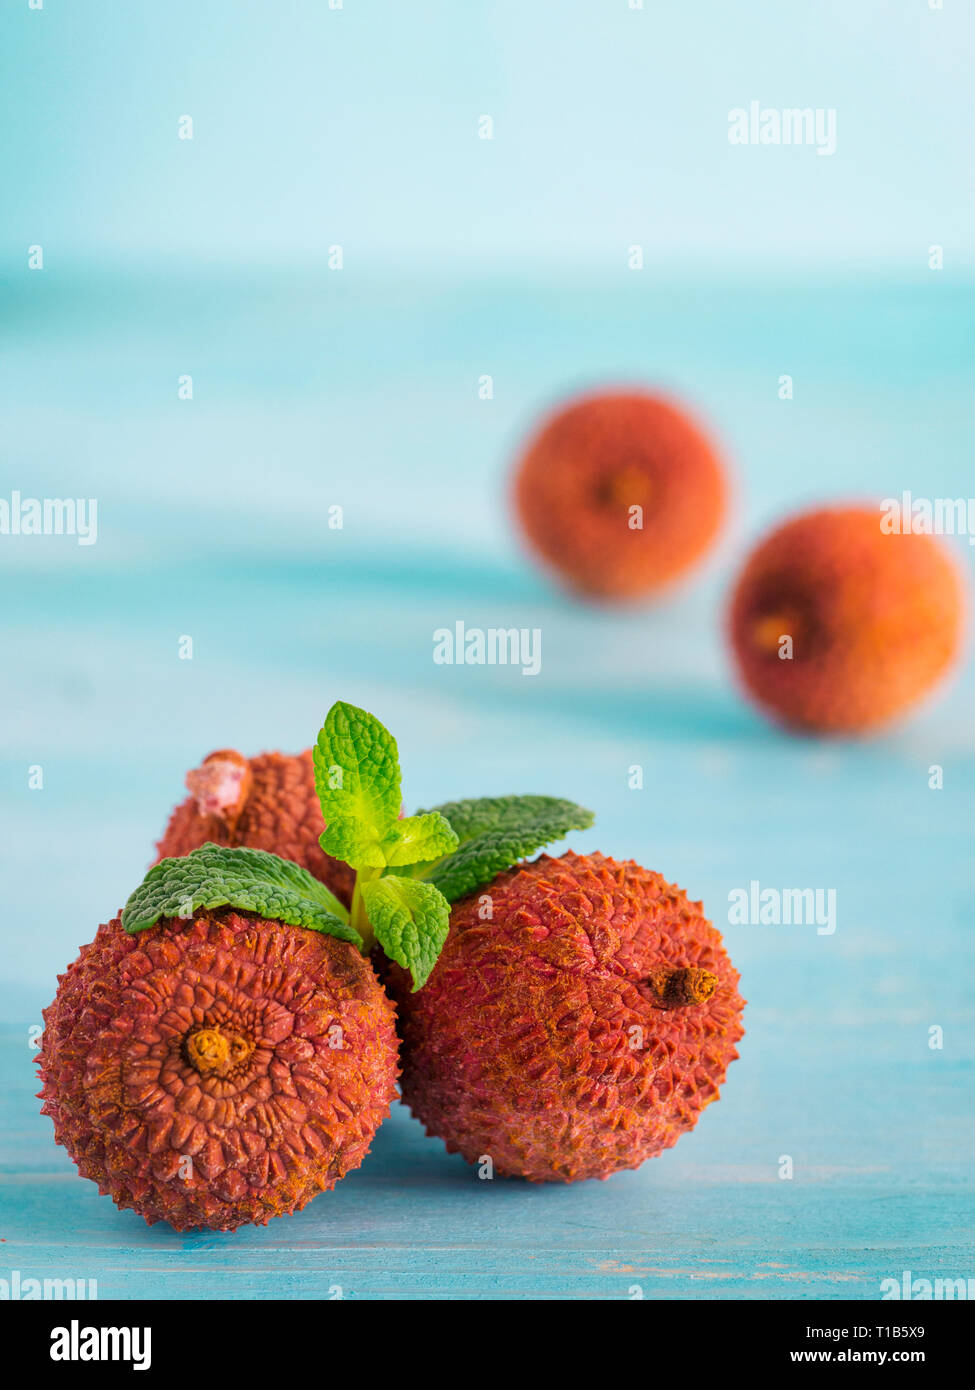 lichee fruit on turquoise wooden background close up Stock Photo